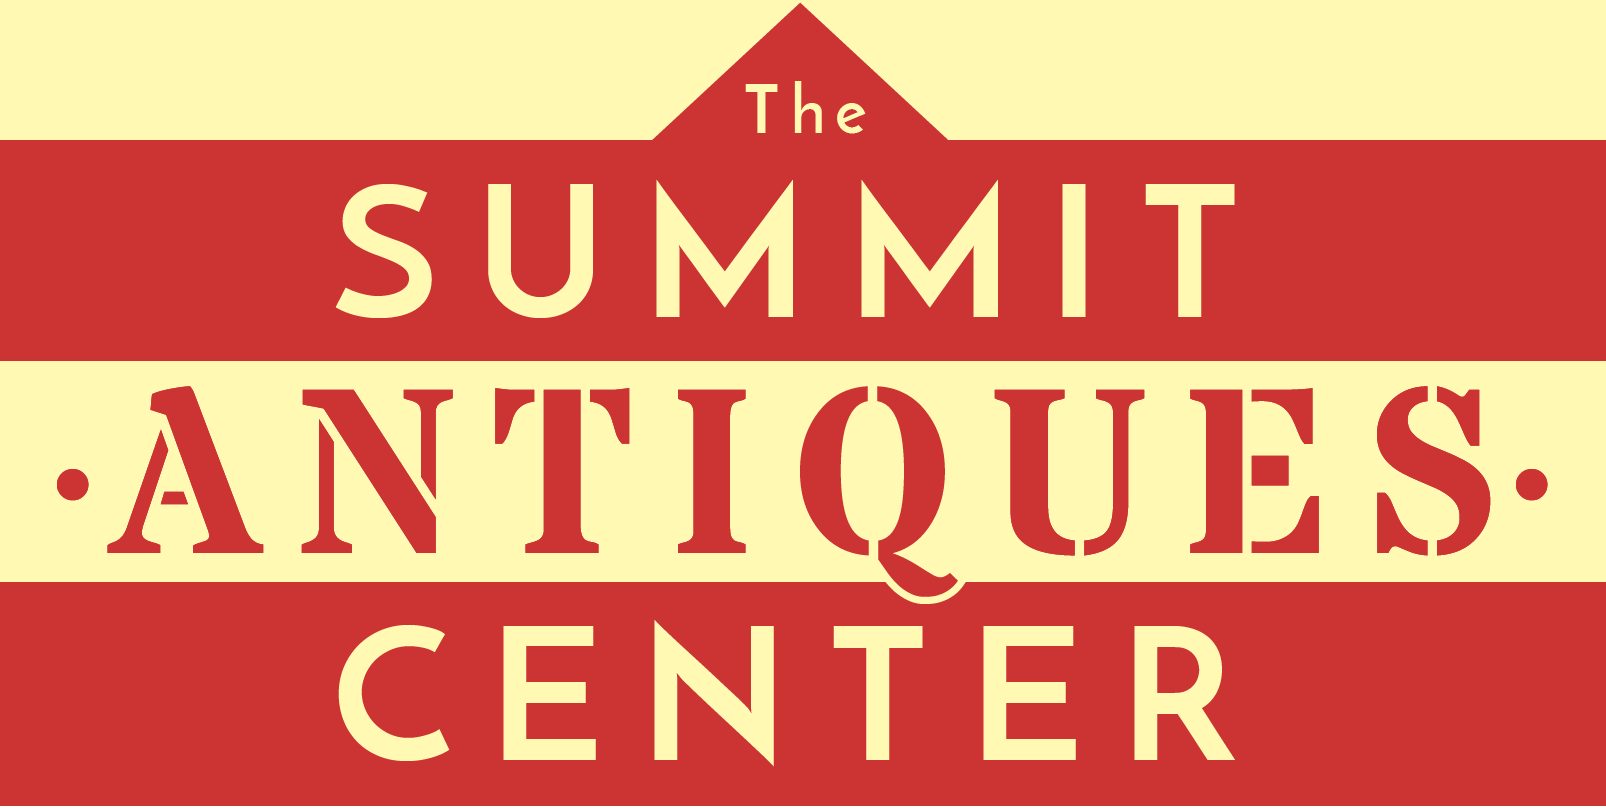 The SUMMIT ANTIQUES CENTER